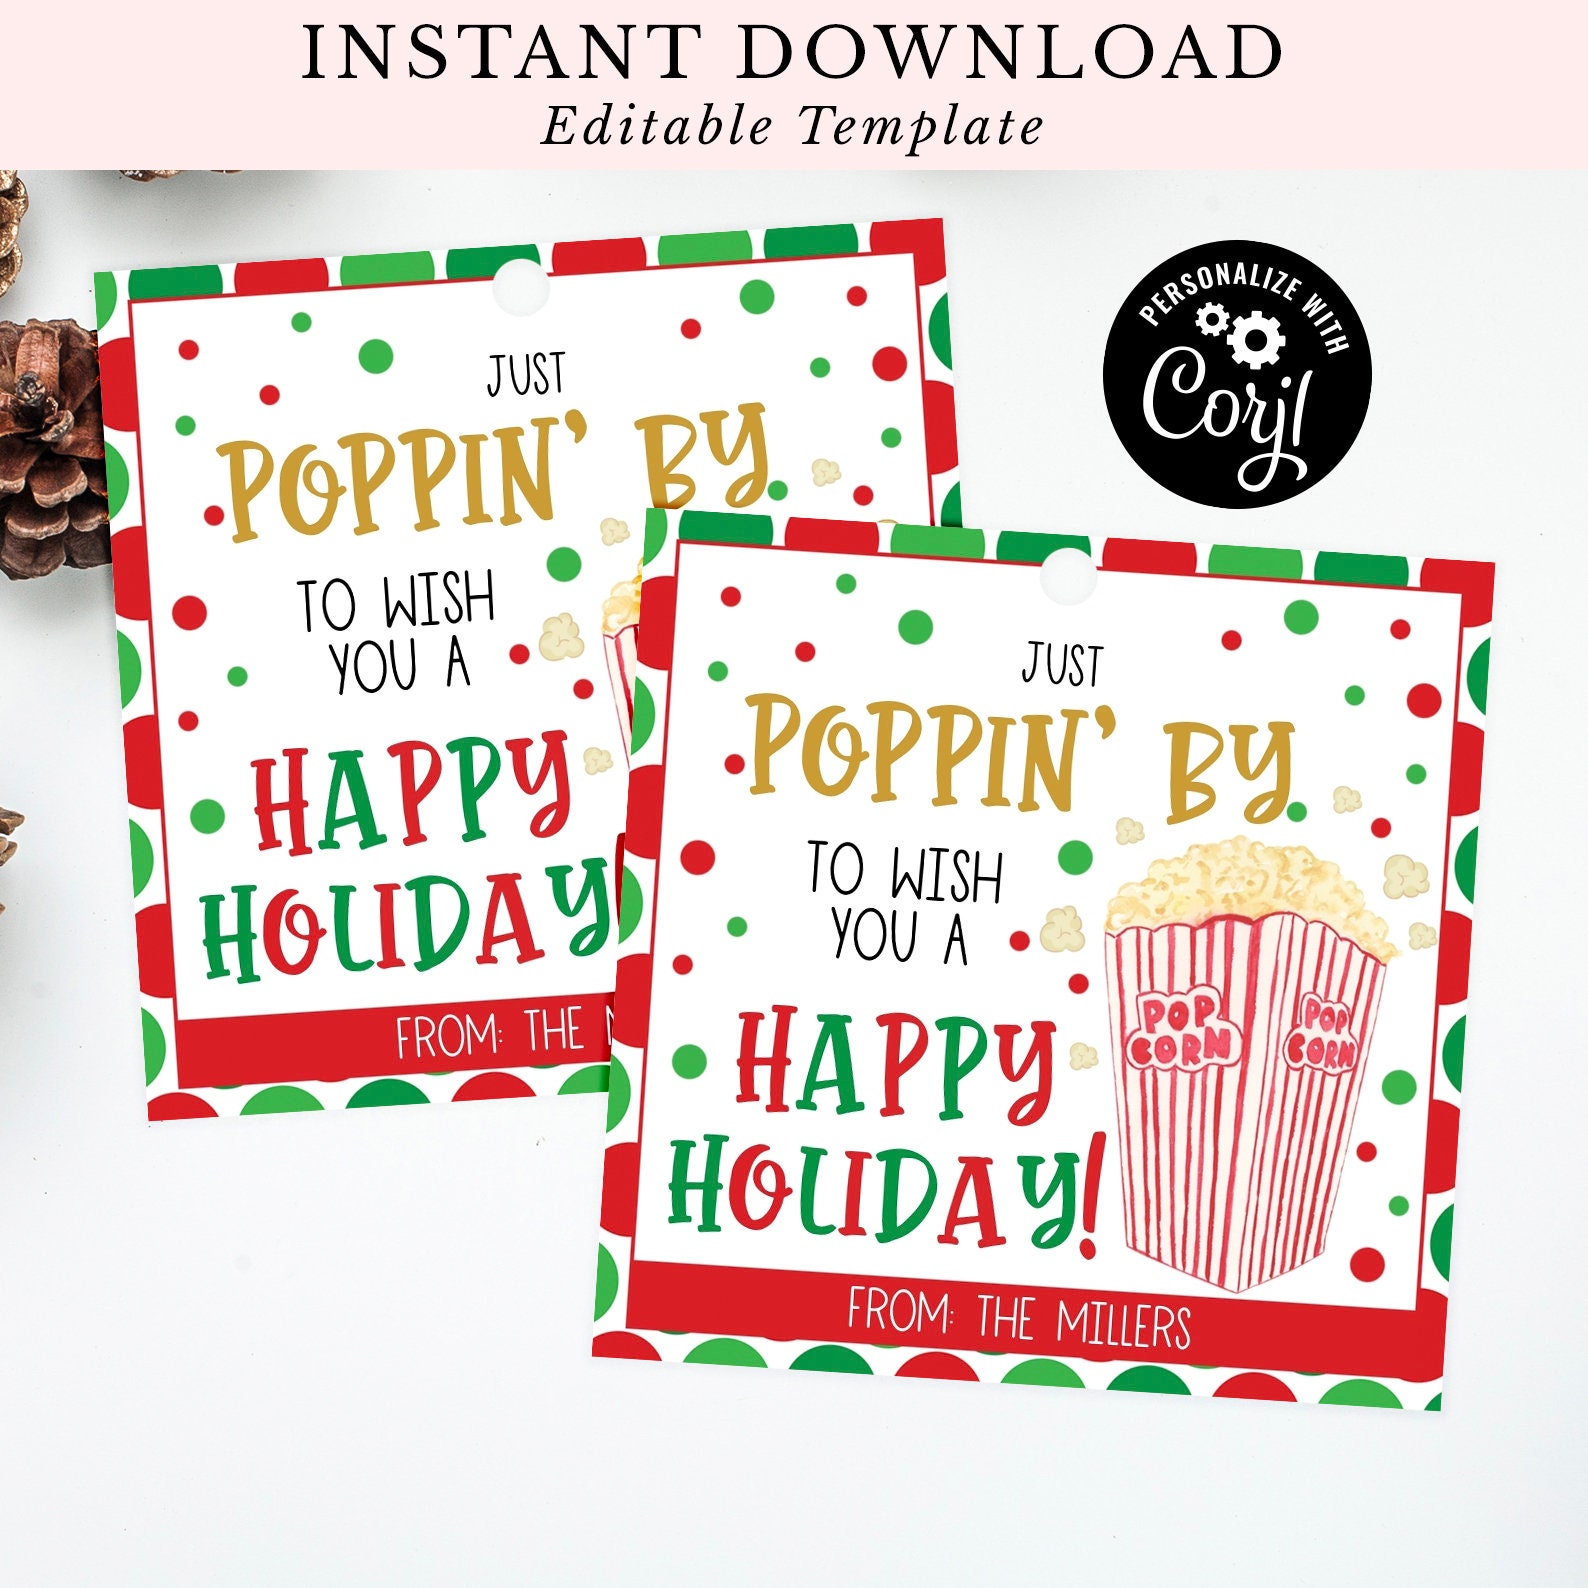 christmas-gift-tag-just-poppin-by-to-wish-you-a-happy-etsy